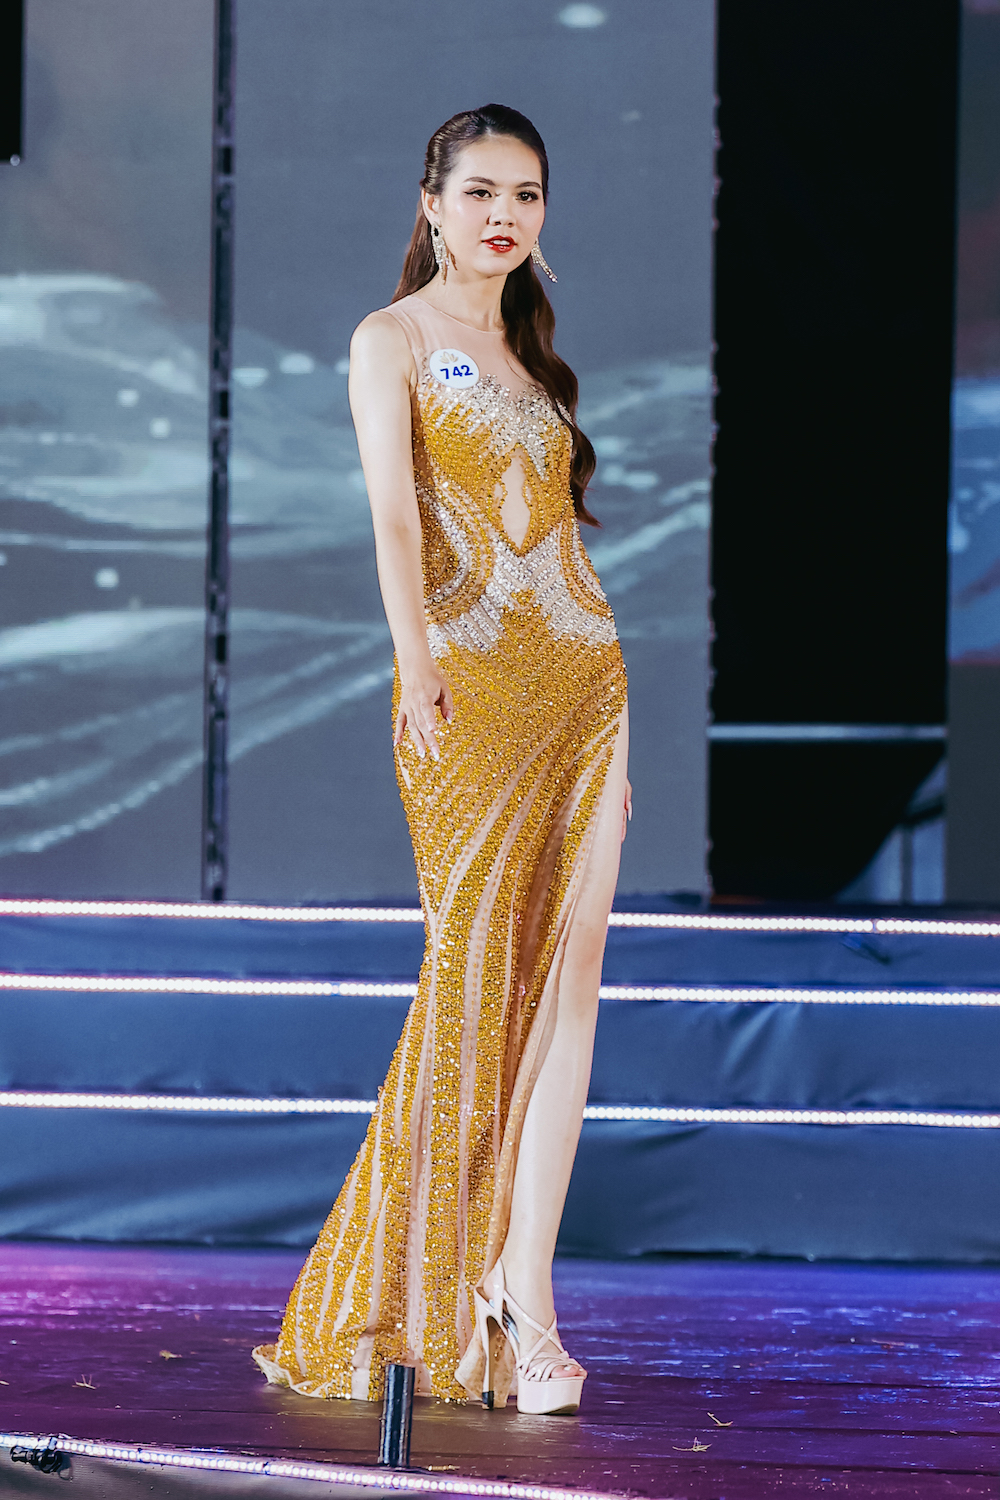 This supplied photo shows Luong Ky Duyen competing in the Miss Tourism Vietnam 2022 finalé in Phu Quoc City, Kien Giang Province, November 13, 2022.